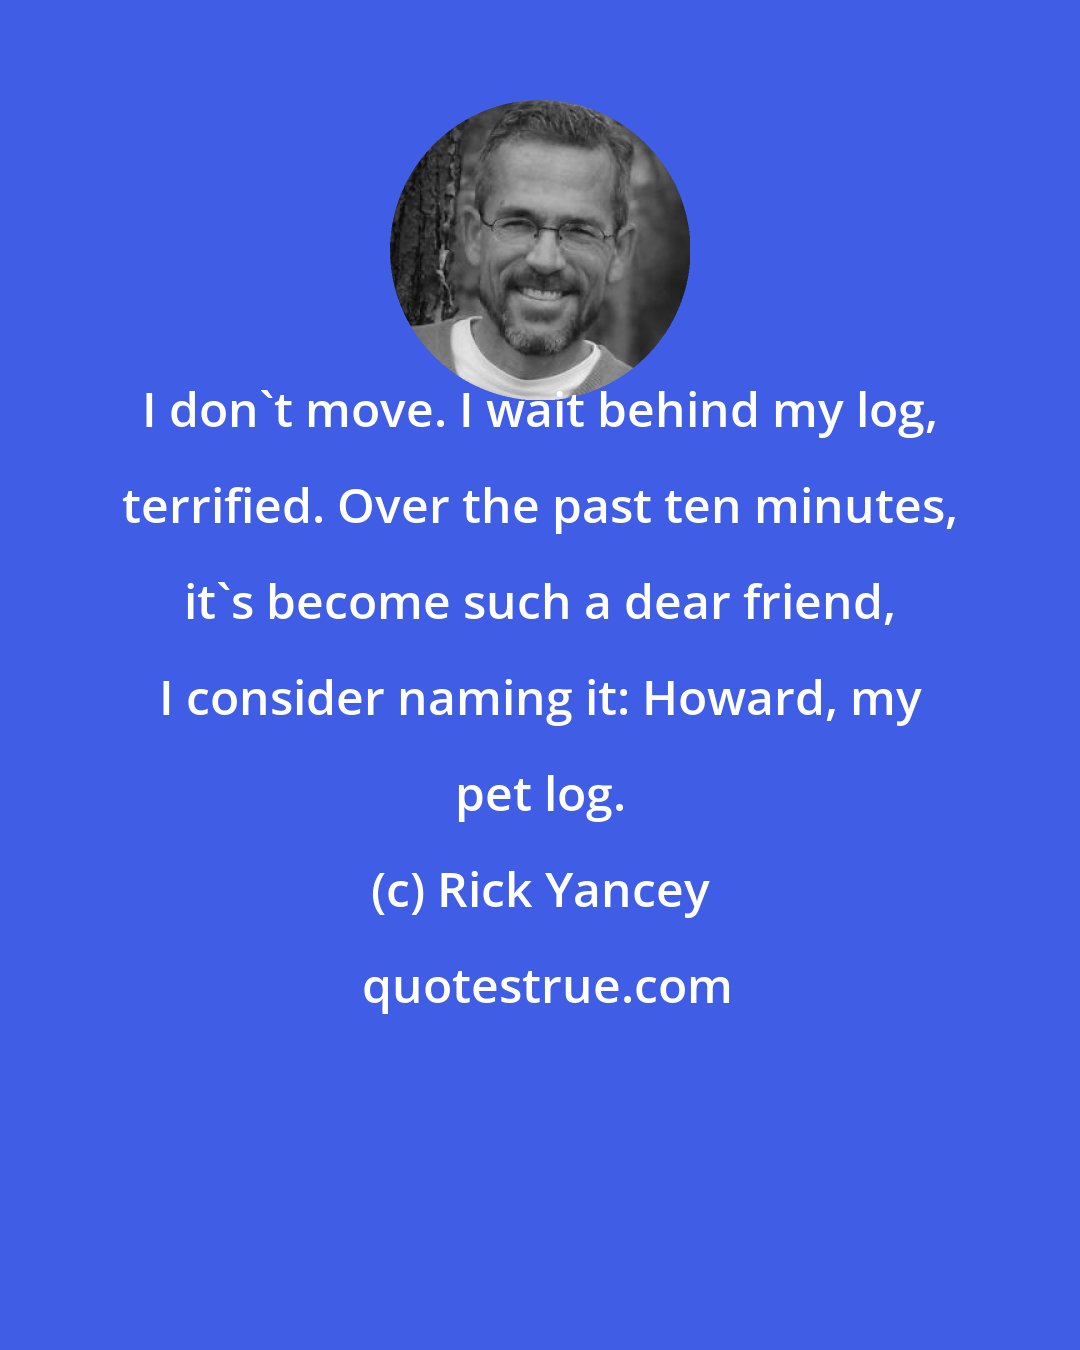 Rick Yancey: I don't move. I wait behind my log, terrified. Over the past ten minutes, it's become such a dear friend, I consider naming it: Howard, my pet log.